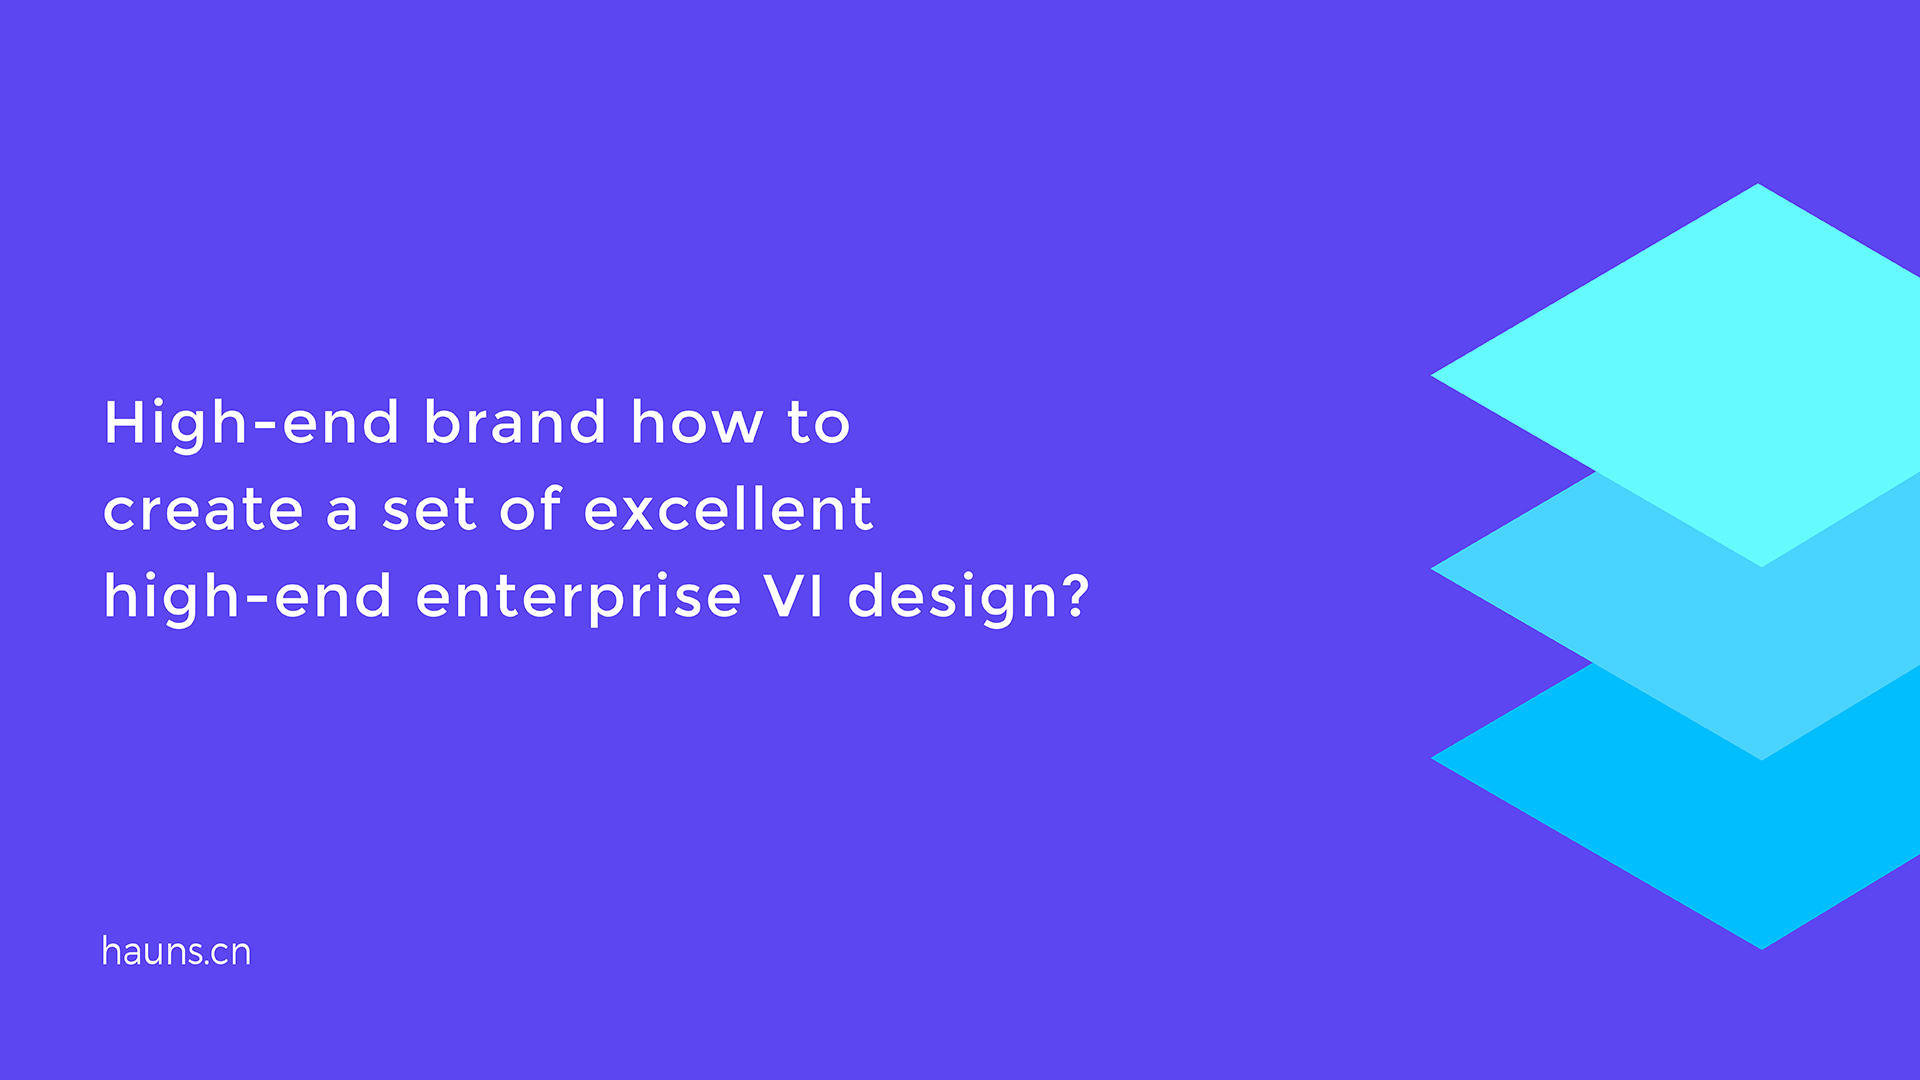 What is visual brand identity? What does the whole visual brand identity include?